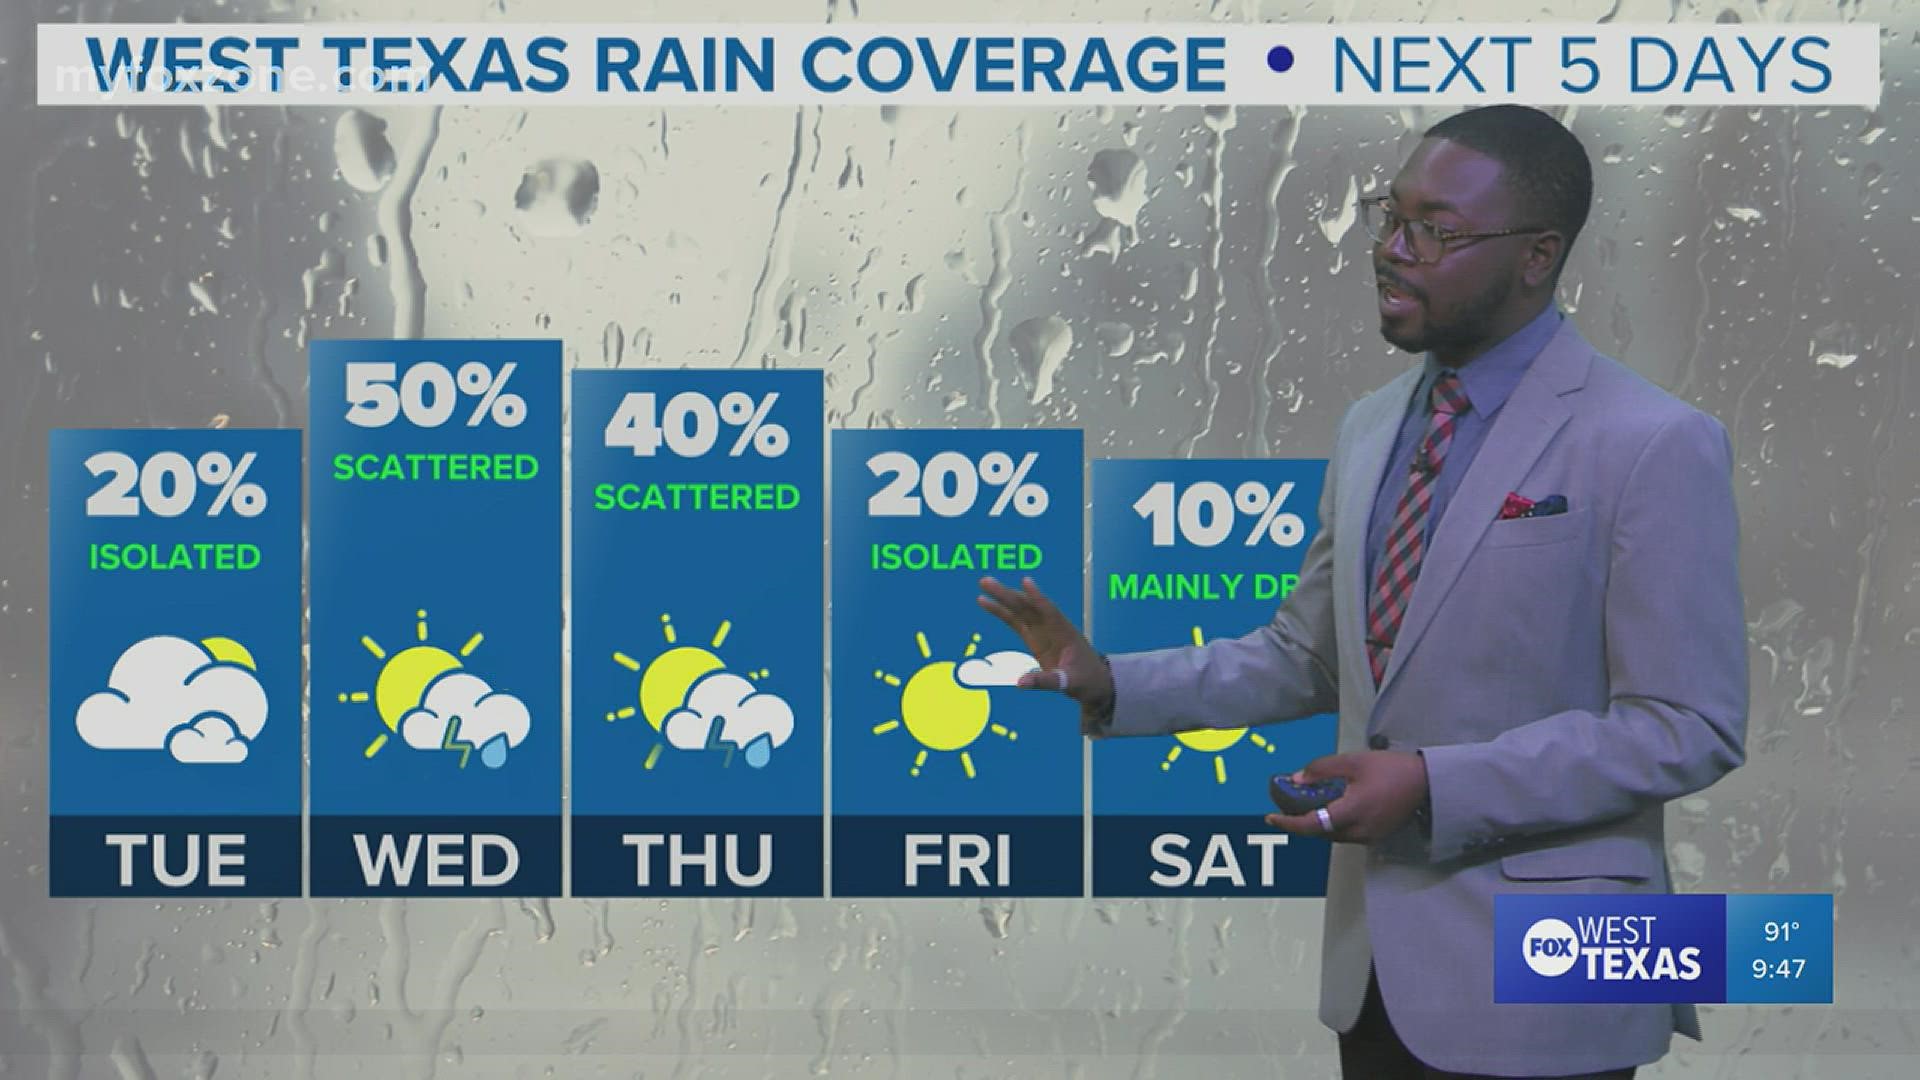 Temperatures will cool down and we'll see rain chances all week long